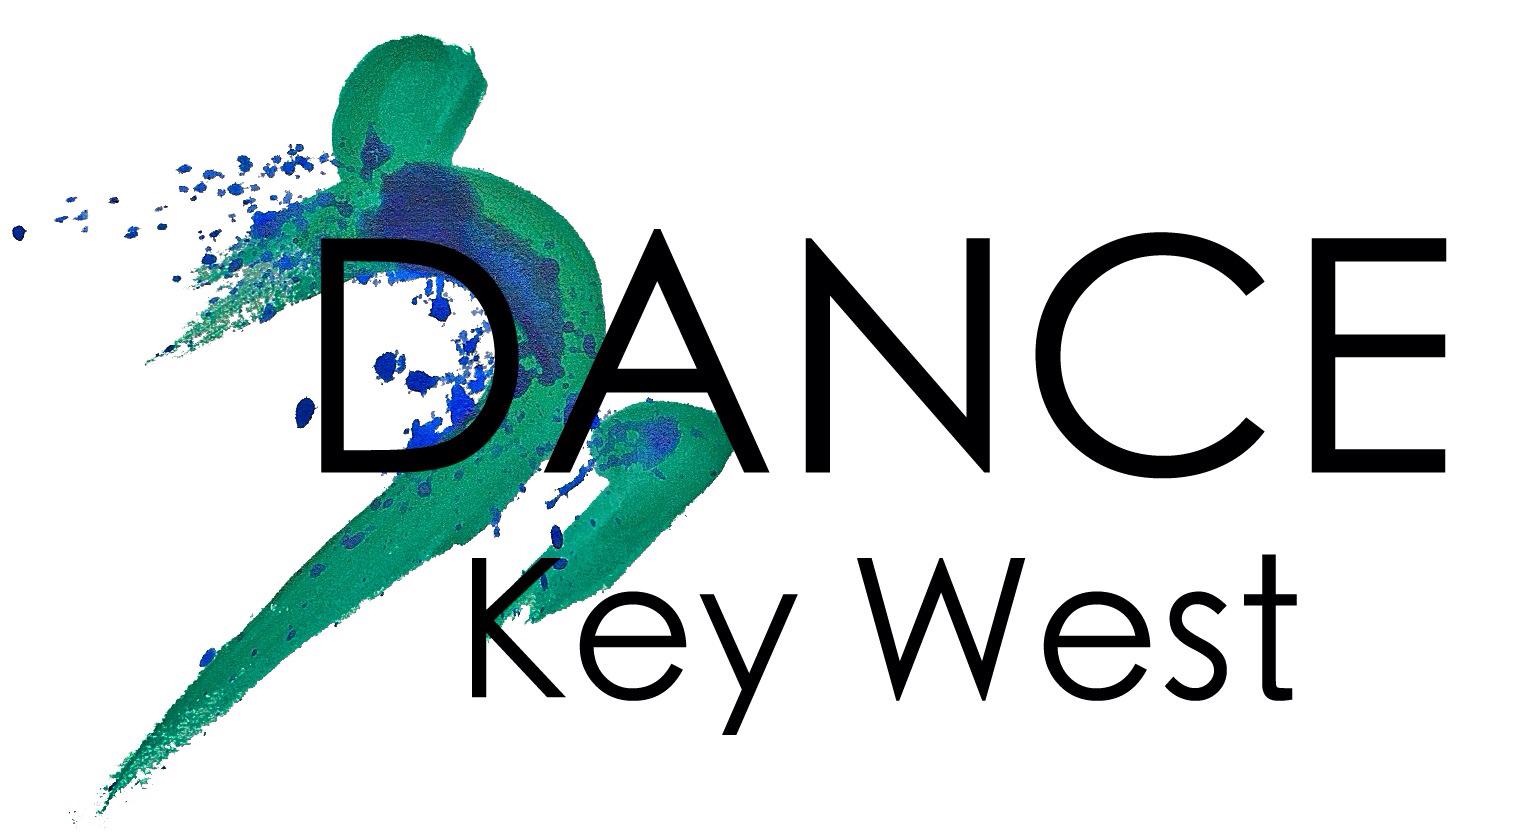 This spring, Dance Key West teams up with MARC — a local non-profit serving adults with developmental disabilities — for an innovative project that nurtures creative spirits. See the inspiring results during this one-night only dance showcase!